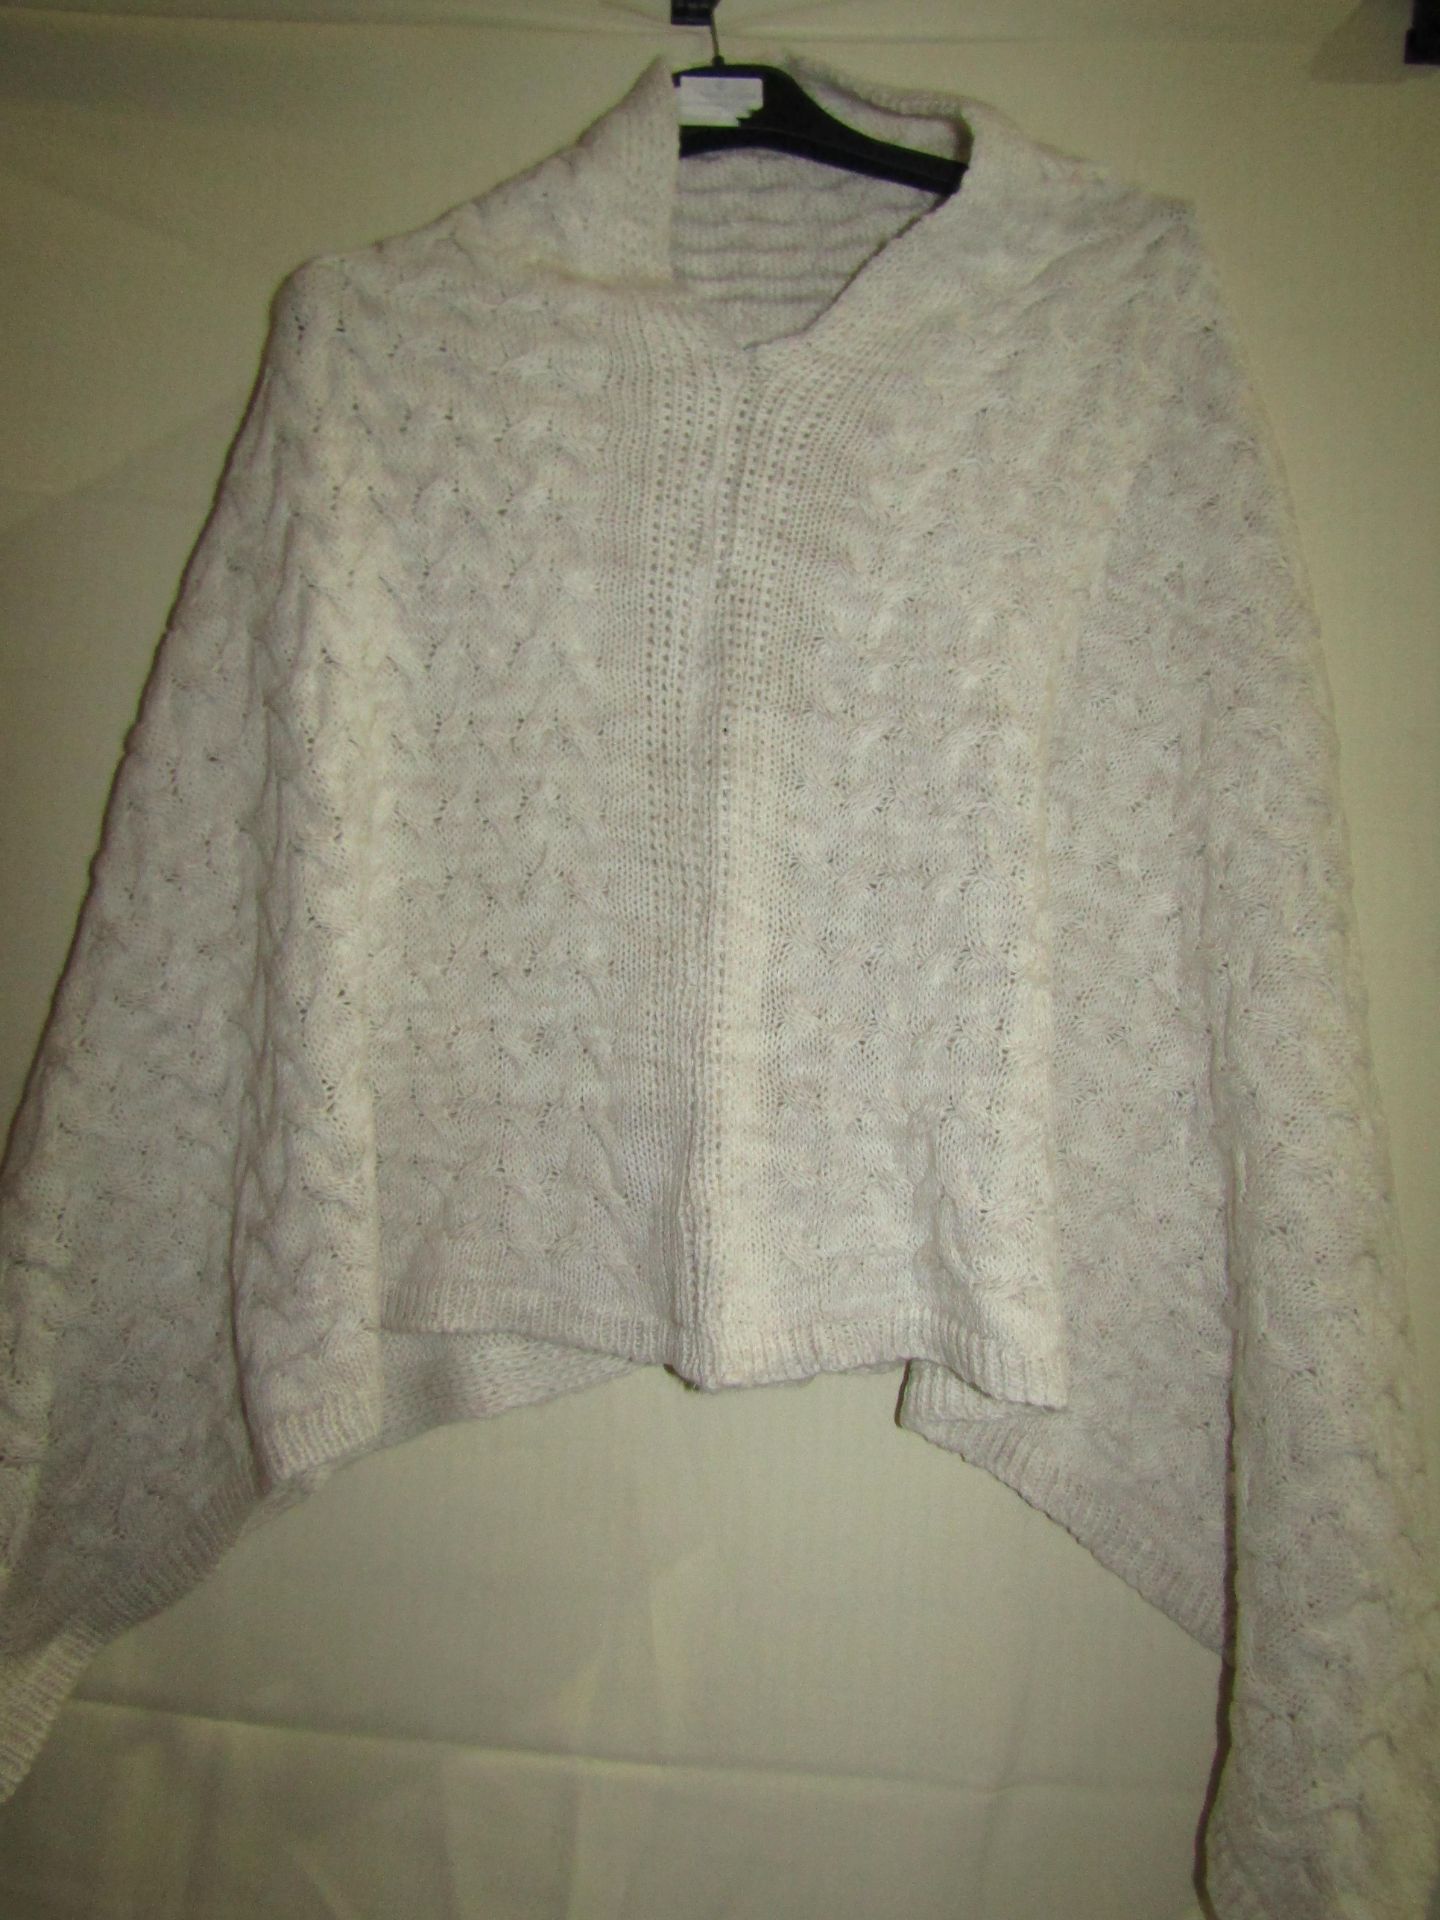 1 X Knitted Poncho"s Cream One Size New & Packaged